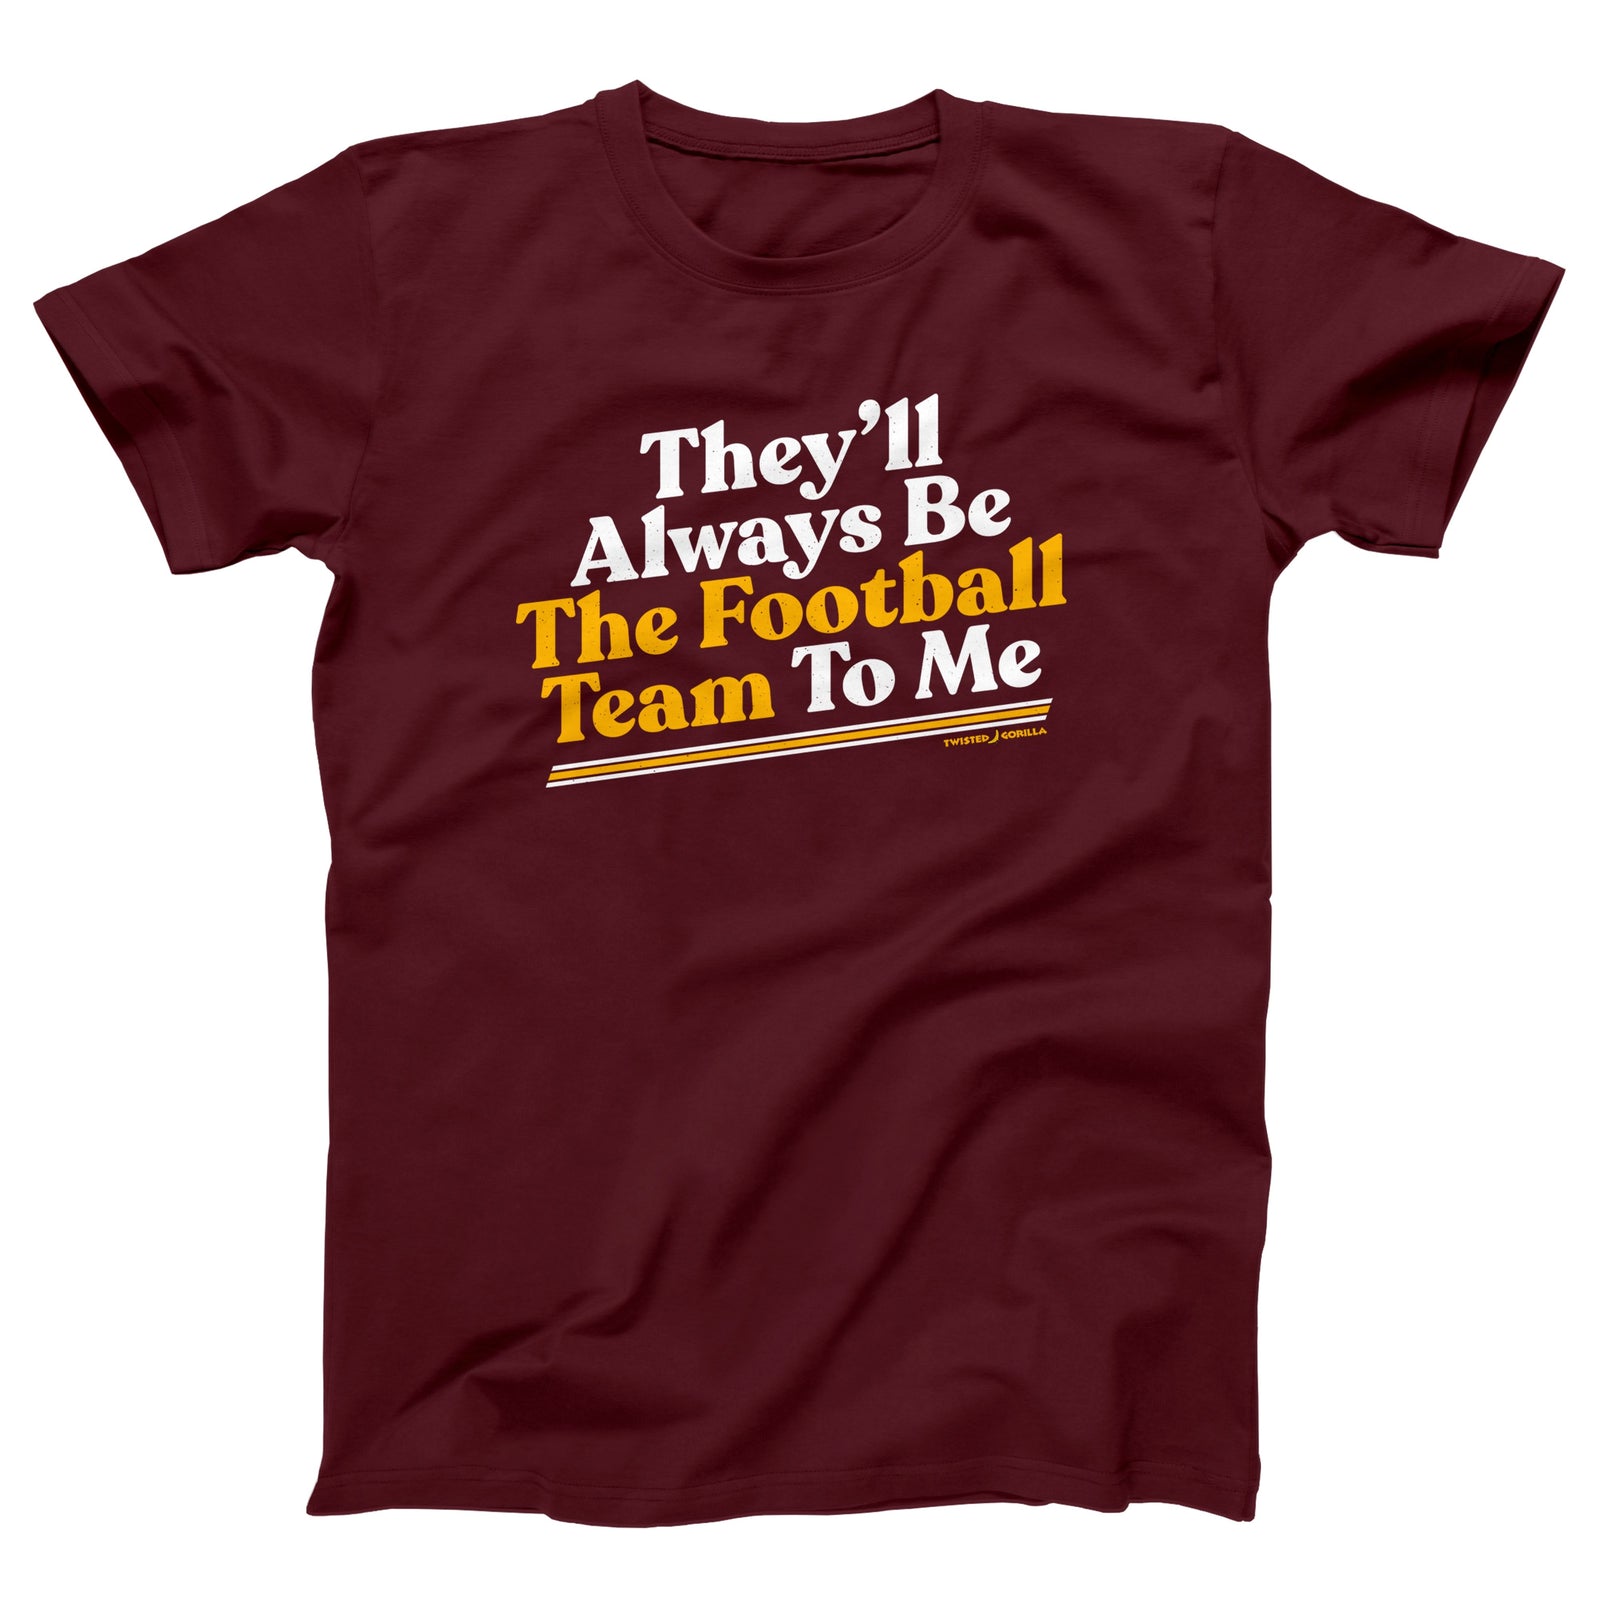 //cdn.shopify.com/s/files/1/0274/2488/2766/products/theyll-always-be-the-football-team-to-me-menunisex-t-shirt-987607_5000x.jpg?v=1641833006 5000w,
    //cdn.shopify.com/s/files/1/0274/2488/2766/products/theyll-always-be-the-football-team-to-me-menunisex-t-shirt-987607_4500x.jpg?v=1641833006 4500w,
    //cdn.shopify.com/s/files/1/0274/2488/2766/products/theyll-always-be-the-football-team-to-me-menunisex-t-shirt-987607_4000x.jpg?v=1641833006 4000w,
    //cdn.shopify.com/s/files/1/0274/2488/2766/products/theyll-always-be-the-football-team-to-me-menunisex-t-shirt-987607_3500x.jpg?v=1641833006 3500w,
    //cdn.shopify.com/s/files/1/0274/2488/2766/products/theyll-always-be-the-football-team-to-me-menunisex-t-shirt-987607_3000x.jpg?v=1641833006 3000w,
    //cdn.shopify.com/s/files/1/0274/2488/2766/products/theyll-always-be-the-football-team-to-me-menunisex-t-shirt-987607_2500x.jpg?v=1641833006 2500w,
    //cdn.shopify.com/s/files/1/0274/2488/2766/products/theyll-always-be-the-football-team-to-me-menunisex-t-shirt-987607_2000x.jpg?v=1641833006 2000w,
    //cdn.shopify.com/s/files/1/0274/2488/2766/products/theyll-always-be-the-football-team-to-me-menunisex-t-shirt-987607_1800x.jpg?v=1641833006 1800w,
    //cdn.shopify.com/s/files/1/0274/2488/2766/products/theyll-always-be-the-football-team-to-me-menunisex-t-shirt-987607_1600x.jpg?v=1641833006 1600w,
    //cdn.shopify.com/s/files/1/0274/2488/2766/products/theyll-always-be-the-football-team-to-me-menunisex-t-shirt-987607_1400x.jpg?v=1641833006 1400w,
    //cdn.shopify.com/s/files/1/0274/2488/2766/products/theyll-always-be-the-football-team-to-me-menunisex-t-shirt-987607_1200x.jpg?v=1641833006 1200w,
    //cdn.shopify.com/s/files/1/0274/2488/2766/products/theyll-always-be-the-football-team-to-me-menunisex-t-shirt-987607_1000x.jpg?v=1641833006 1000w,
    //cdn.shopify.com/s/files/1/0274/2488/2766/products/theyll-always-be-the-football-team-to-me-menunisex-t-shirt-987607_800x.jpg?v=1641833006 800w,
    //cdn.shopify.com/s/files/1/0274/2488/2766/products/theyll-always-be-the-football-team-to-me-menunisex-t-shirt-987607_600x.jpg?v=1641833006 600w,
    //cdn.shopify.com/s/files/1/0274/2488/2766/products/theyll-always-be-the-football-team-to-me-menunisex-t-shirt-987607_400x.jpg?v=1641833006 400w,
    //cdn.shopify.com/s/files/1/0274/2488/2766/products/theyll-always-be-the-football-team-to-me-menunisex-t-shirt-987607_200x.jpg?v=1641833006 200w